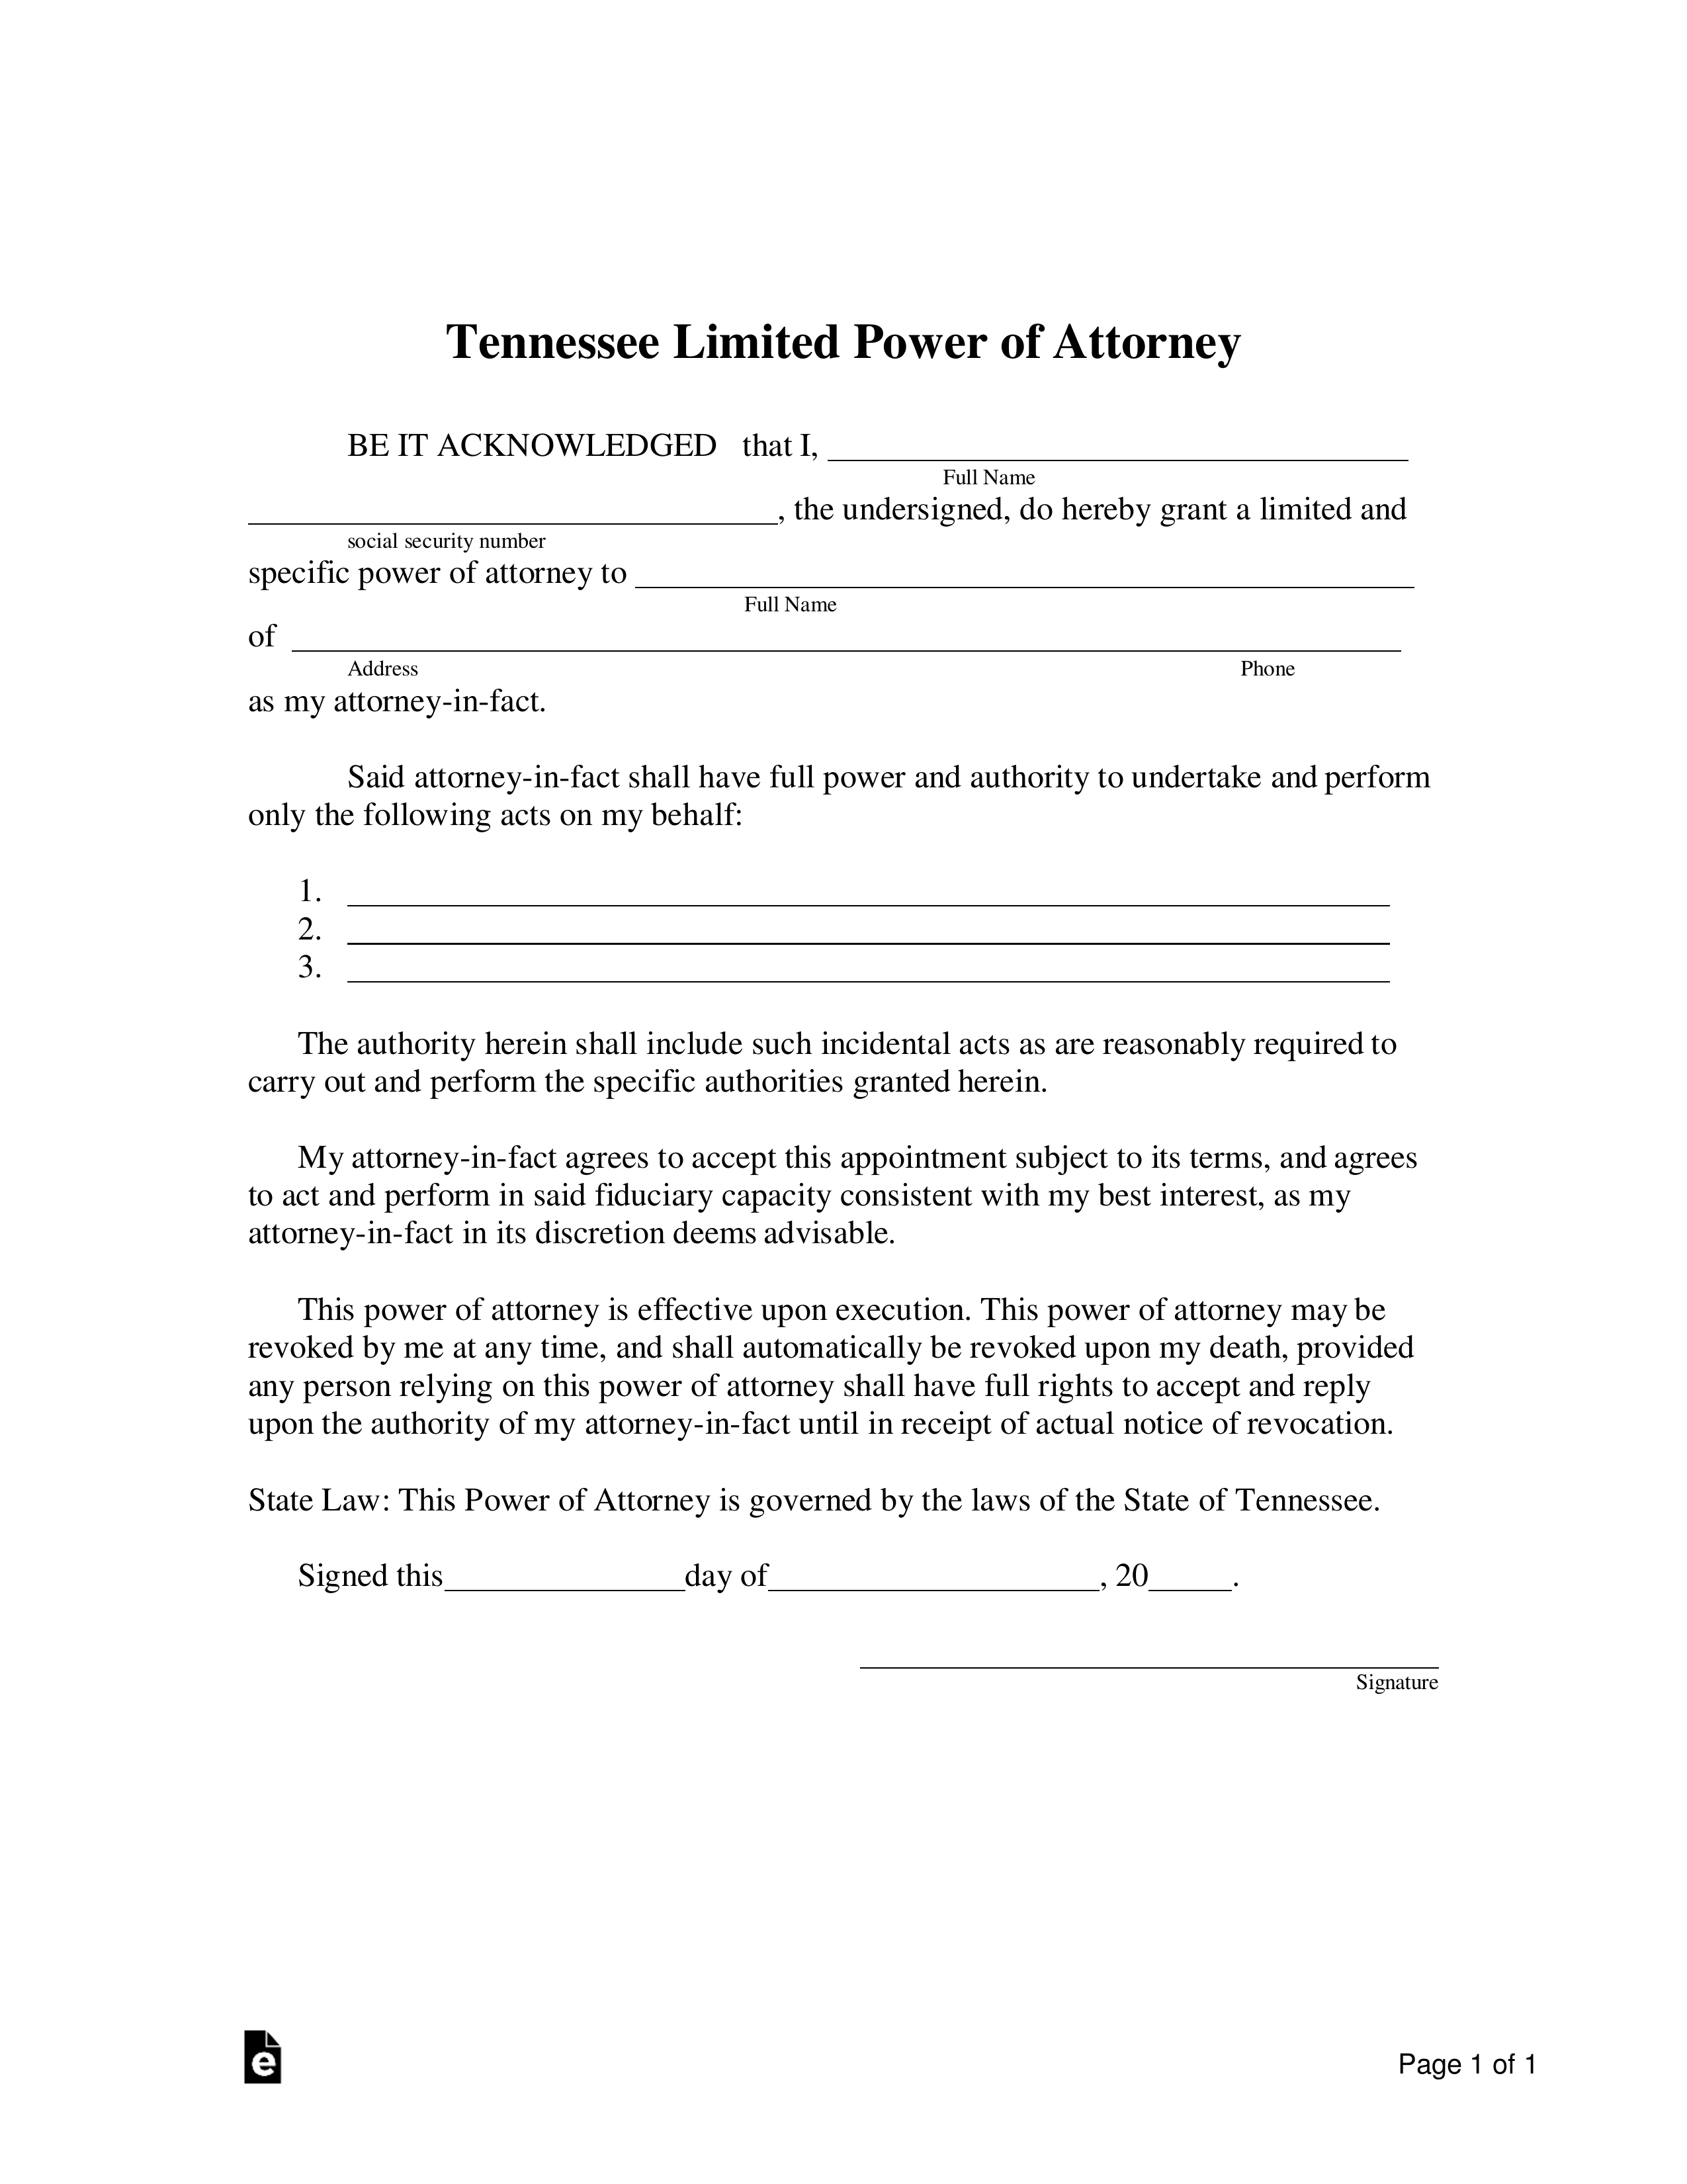 free-tennessee-limited-power-of-attorney-form-word-pdf-eforms